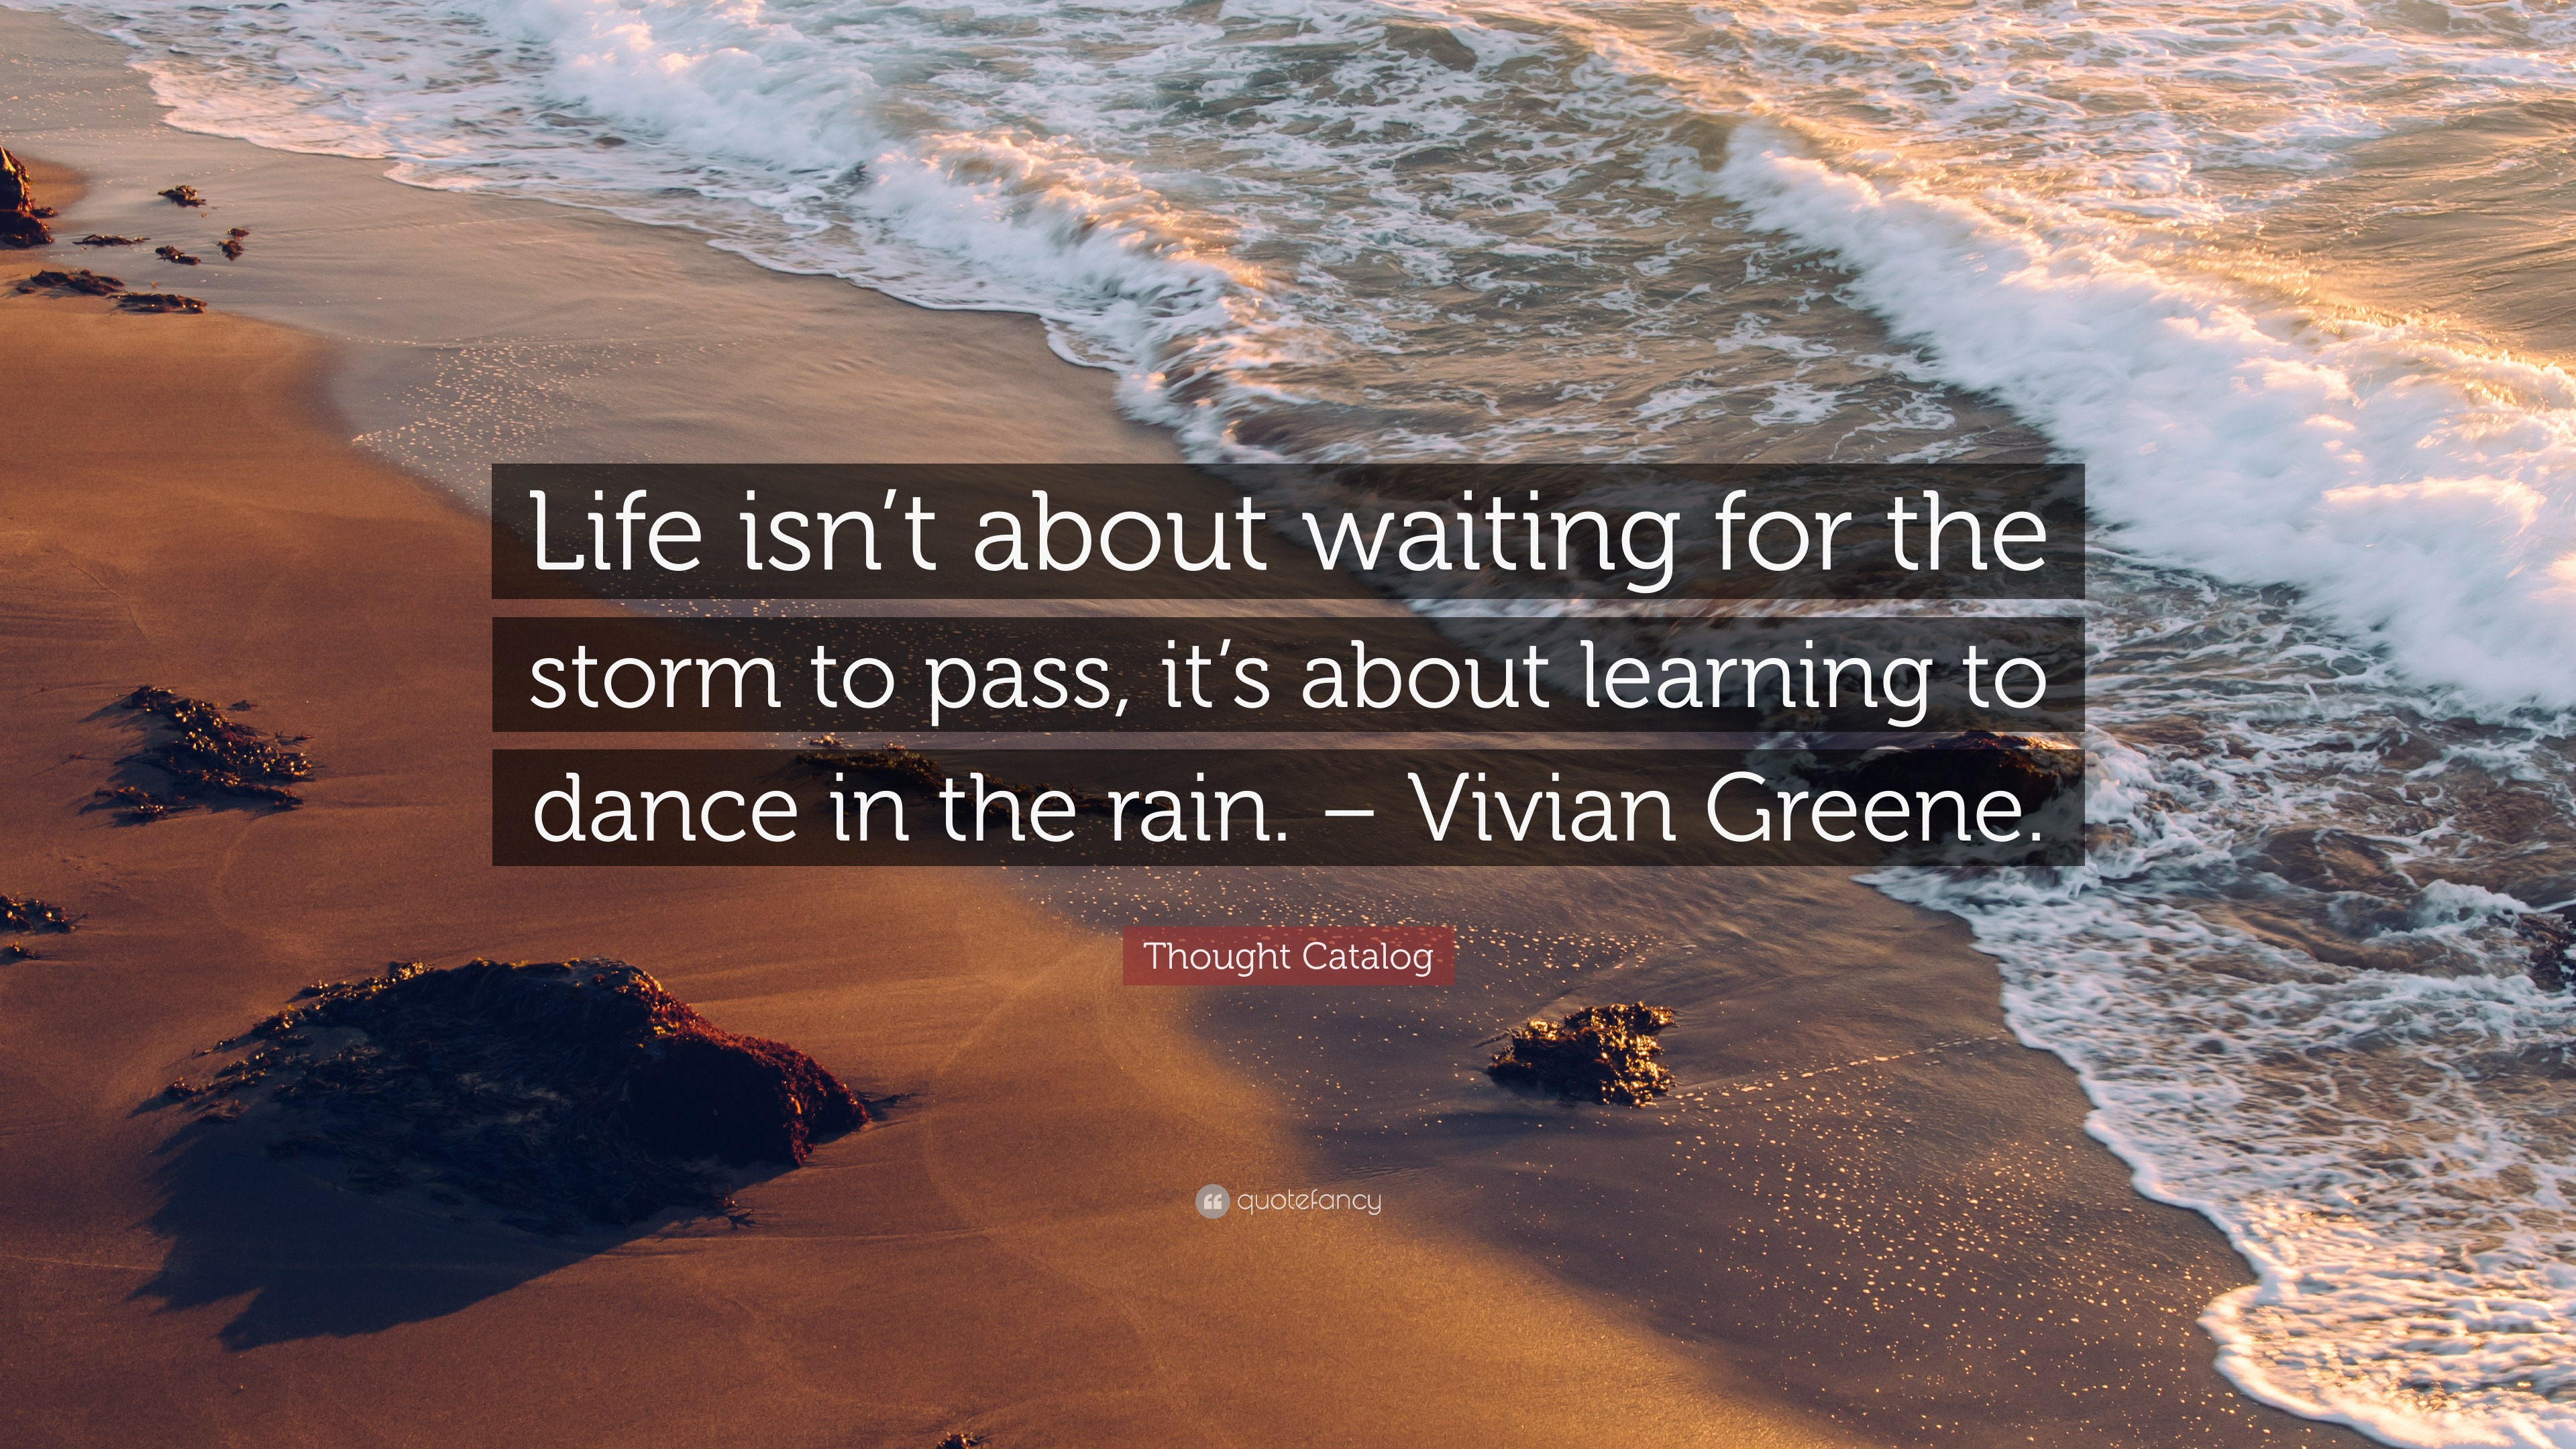 Thought Catalog Quote: “Life isn’t about waiting for the storm to pass ...